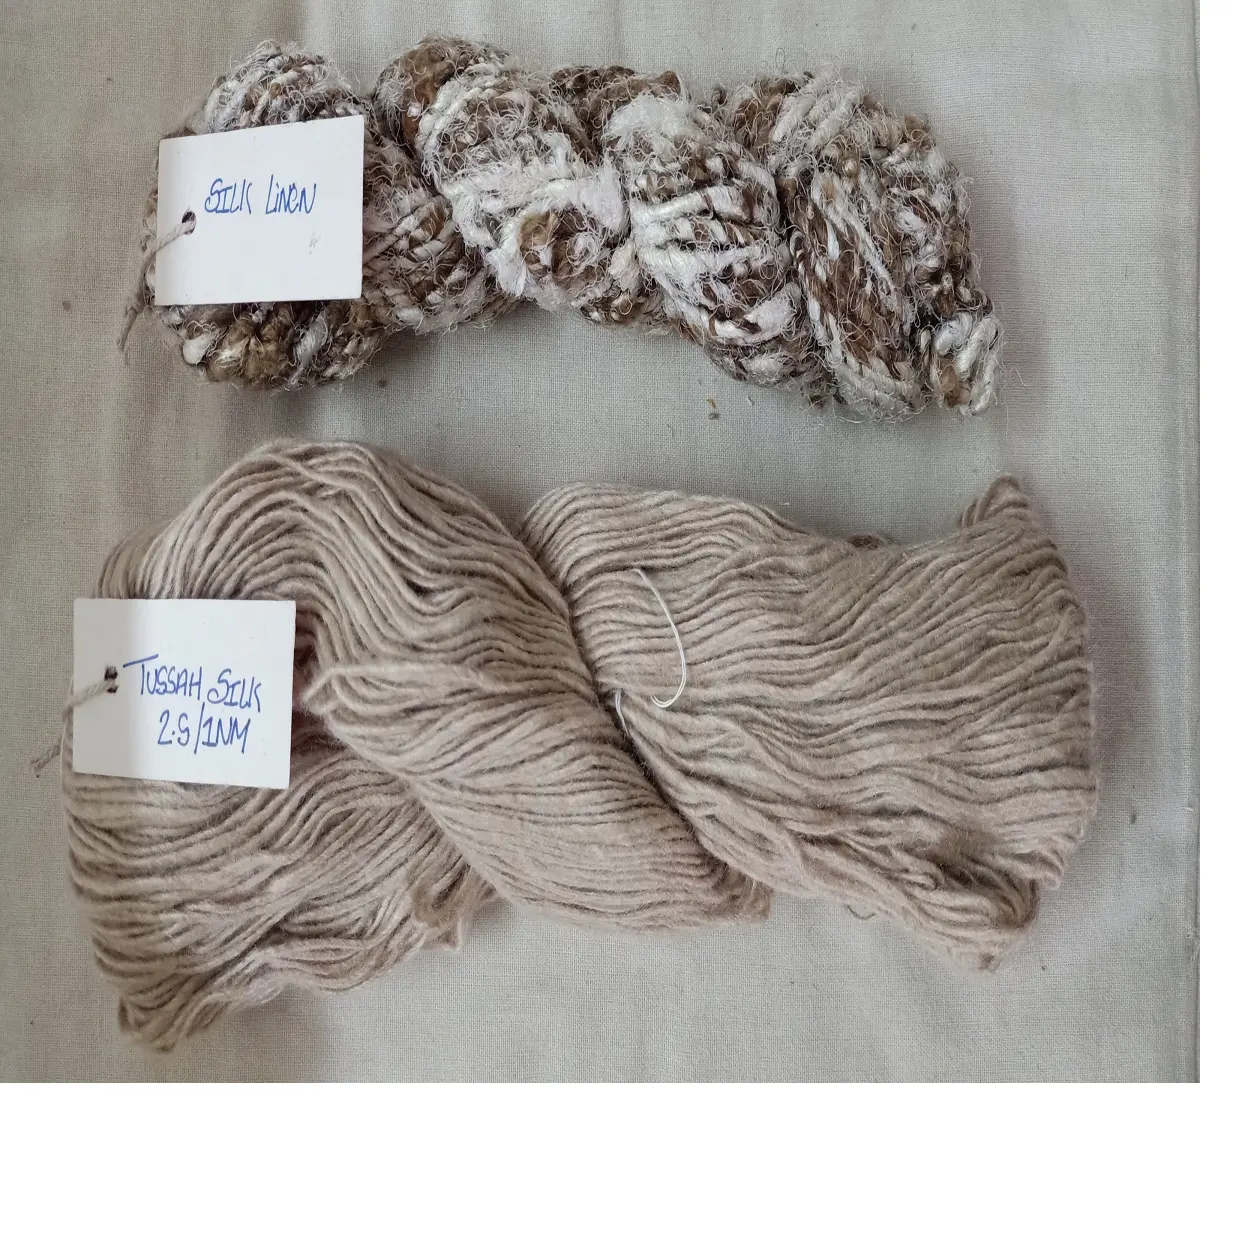 custom made very nice & fine natural tussah silk yarn in 2.5 NM and silk linen blended yarn ideal for yarn stores for resale